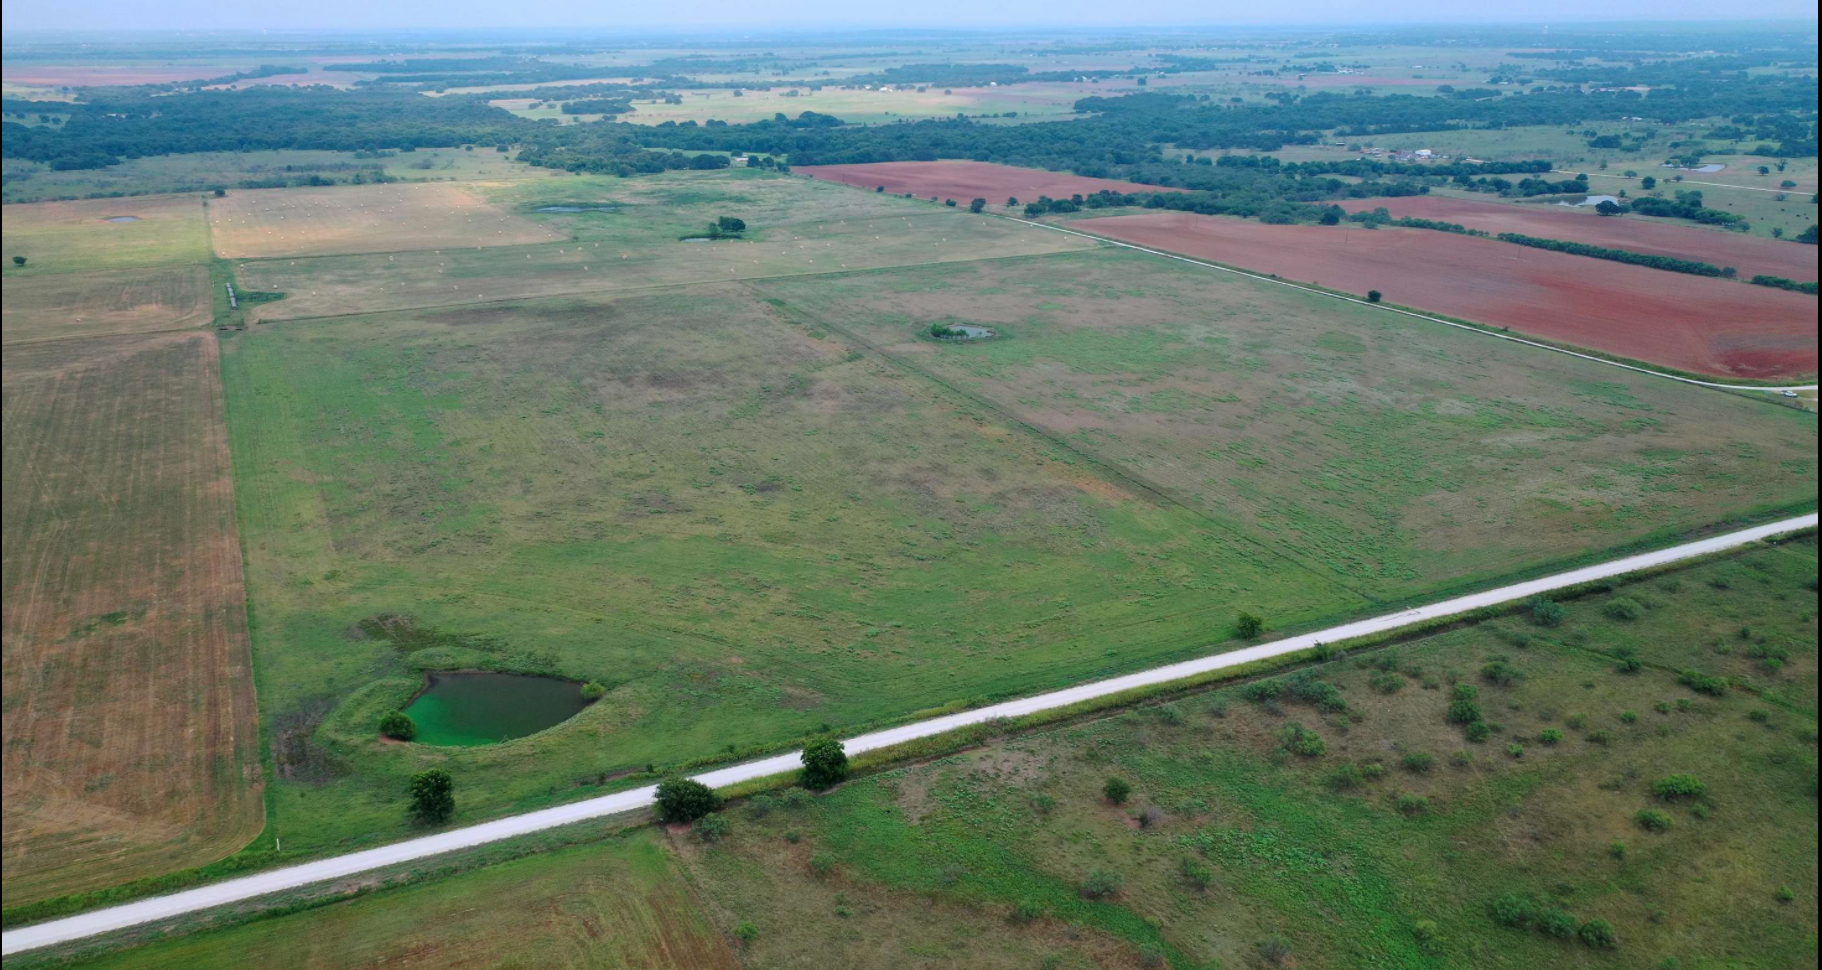 red-river-realty-gary-eldred-montague-county-nocona-texas-acres-development-new-home-builds-tract-landScreen Shot 2021-09-22 at 2.33.47 PM.png